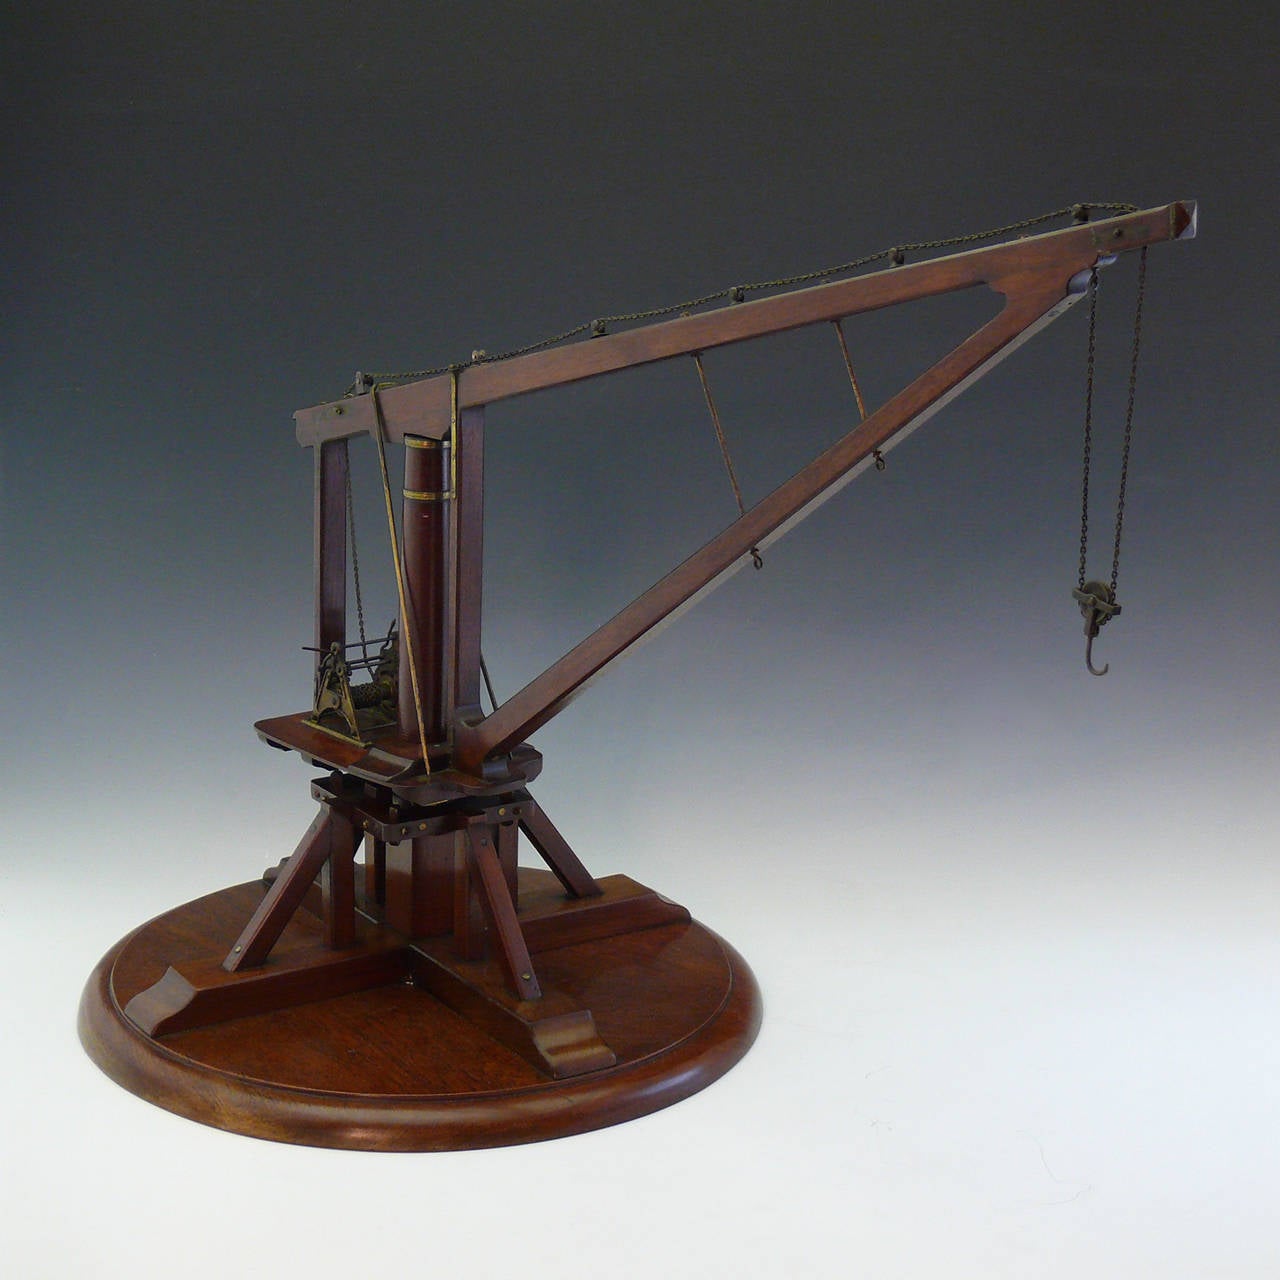 Unusual large-scale model of a late-Victorian crane, circa 1880. Beautifully constructed in mahogany with brass binding and details and the original working metal winch and chains, all perfectly scaled. The model is finely detailed and it could have